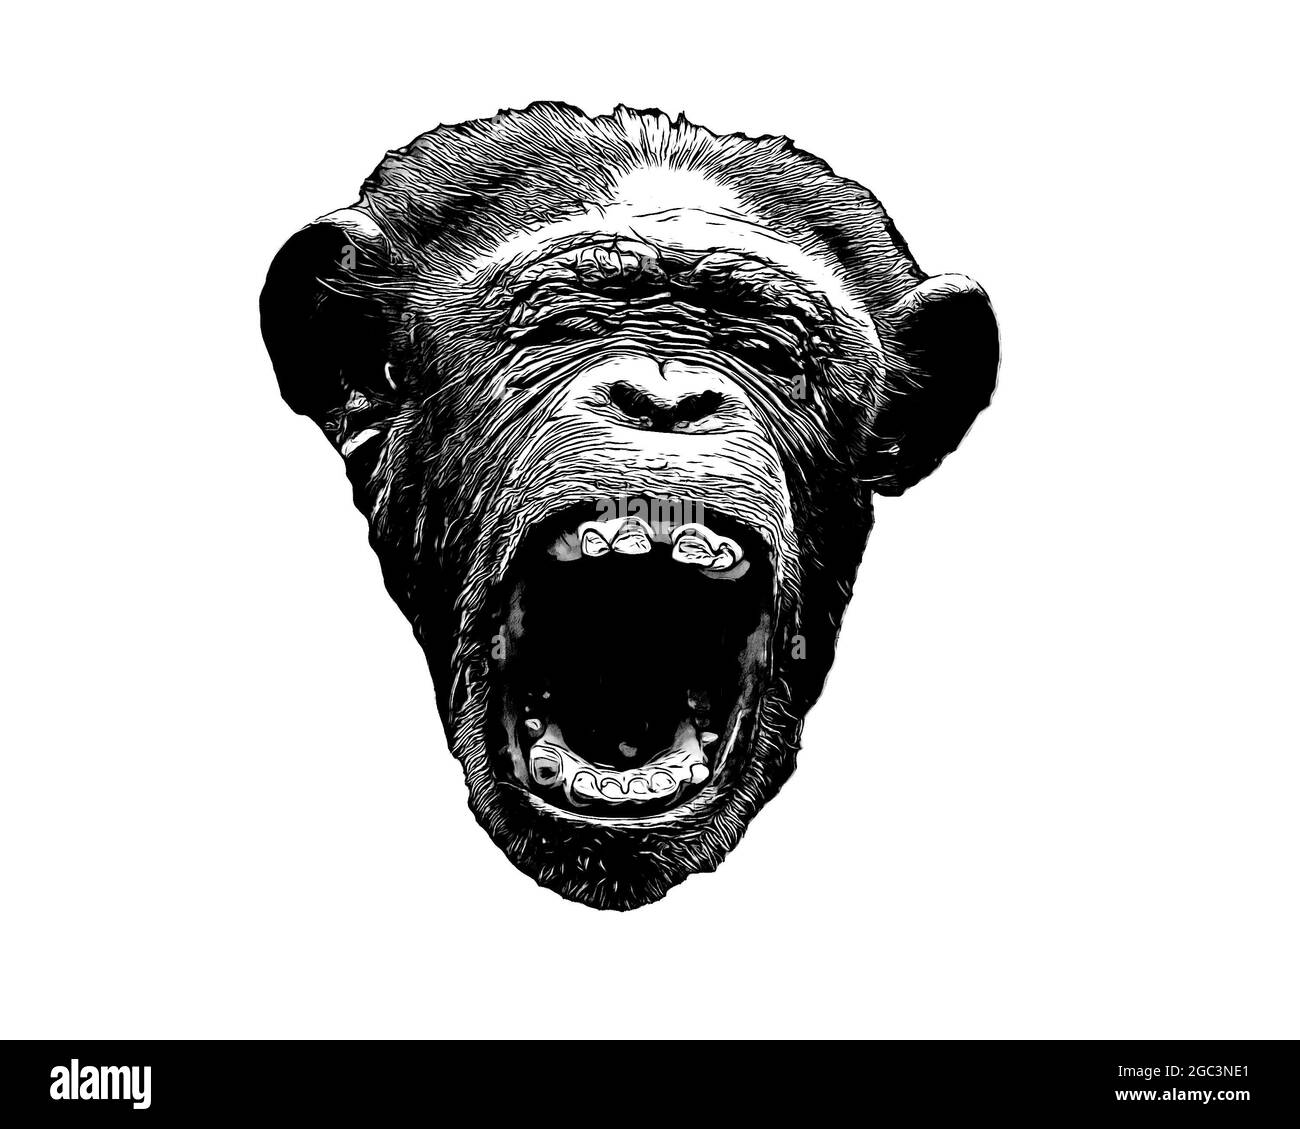 Digital ink and wash black and white portrait illustration of an angry chetah ape screaming isolated on a white background Stock Photo